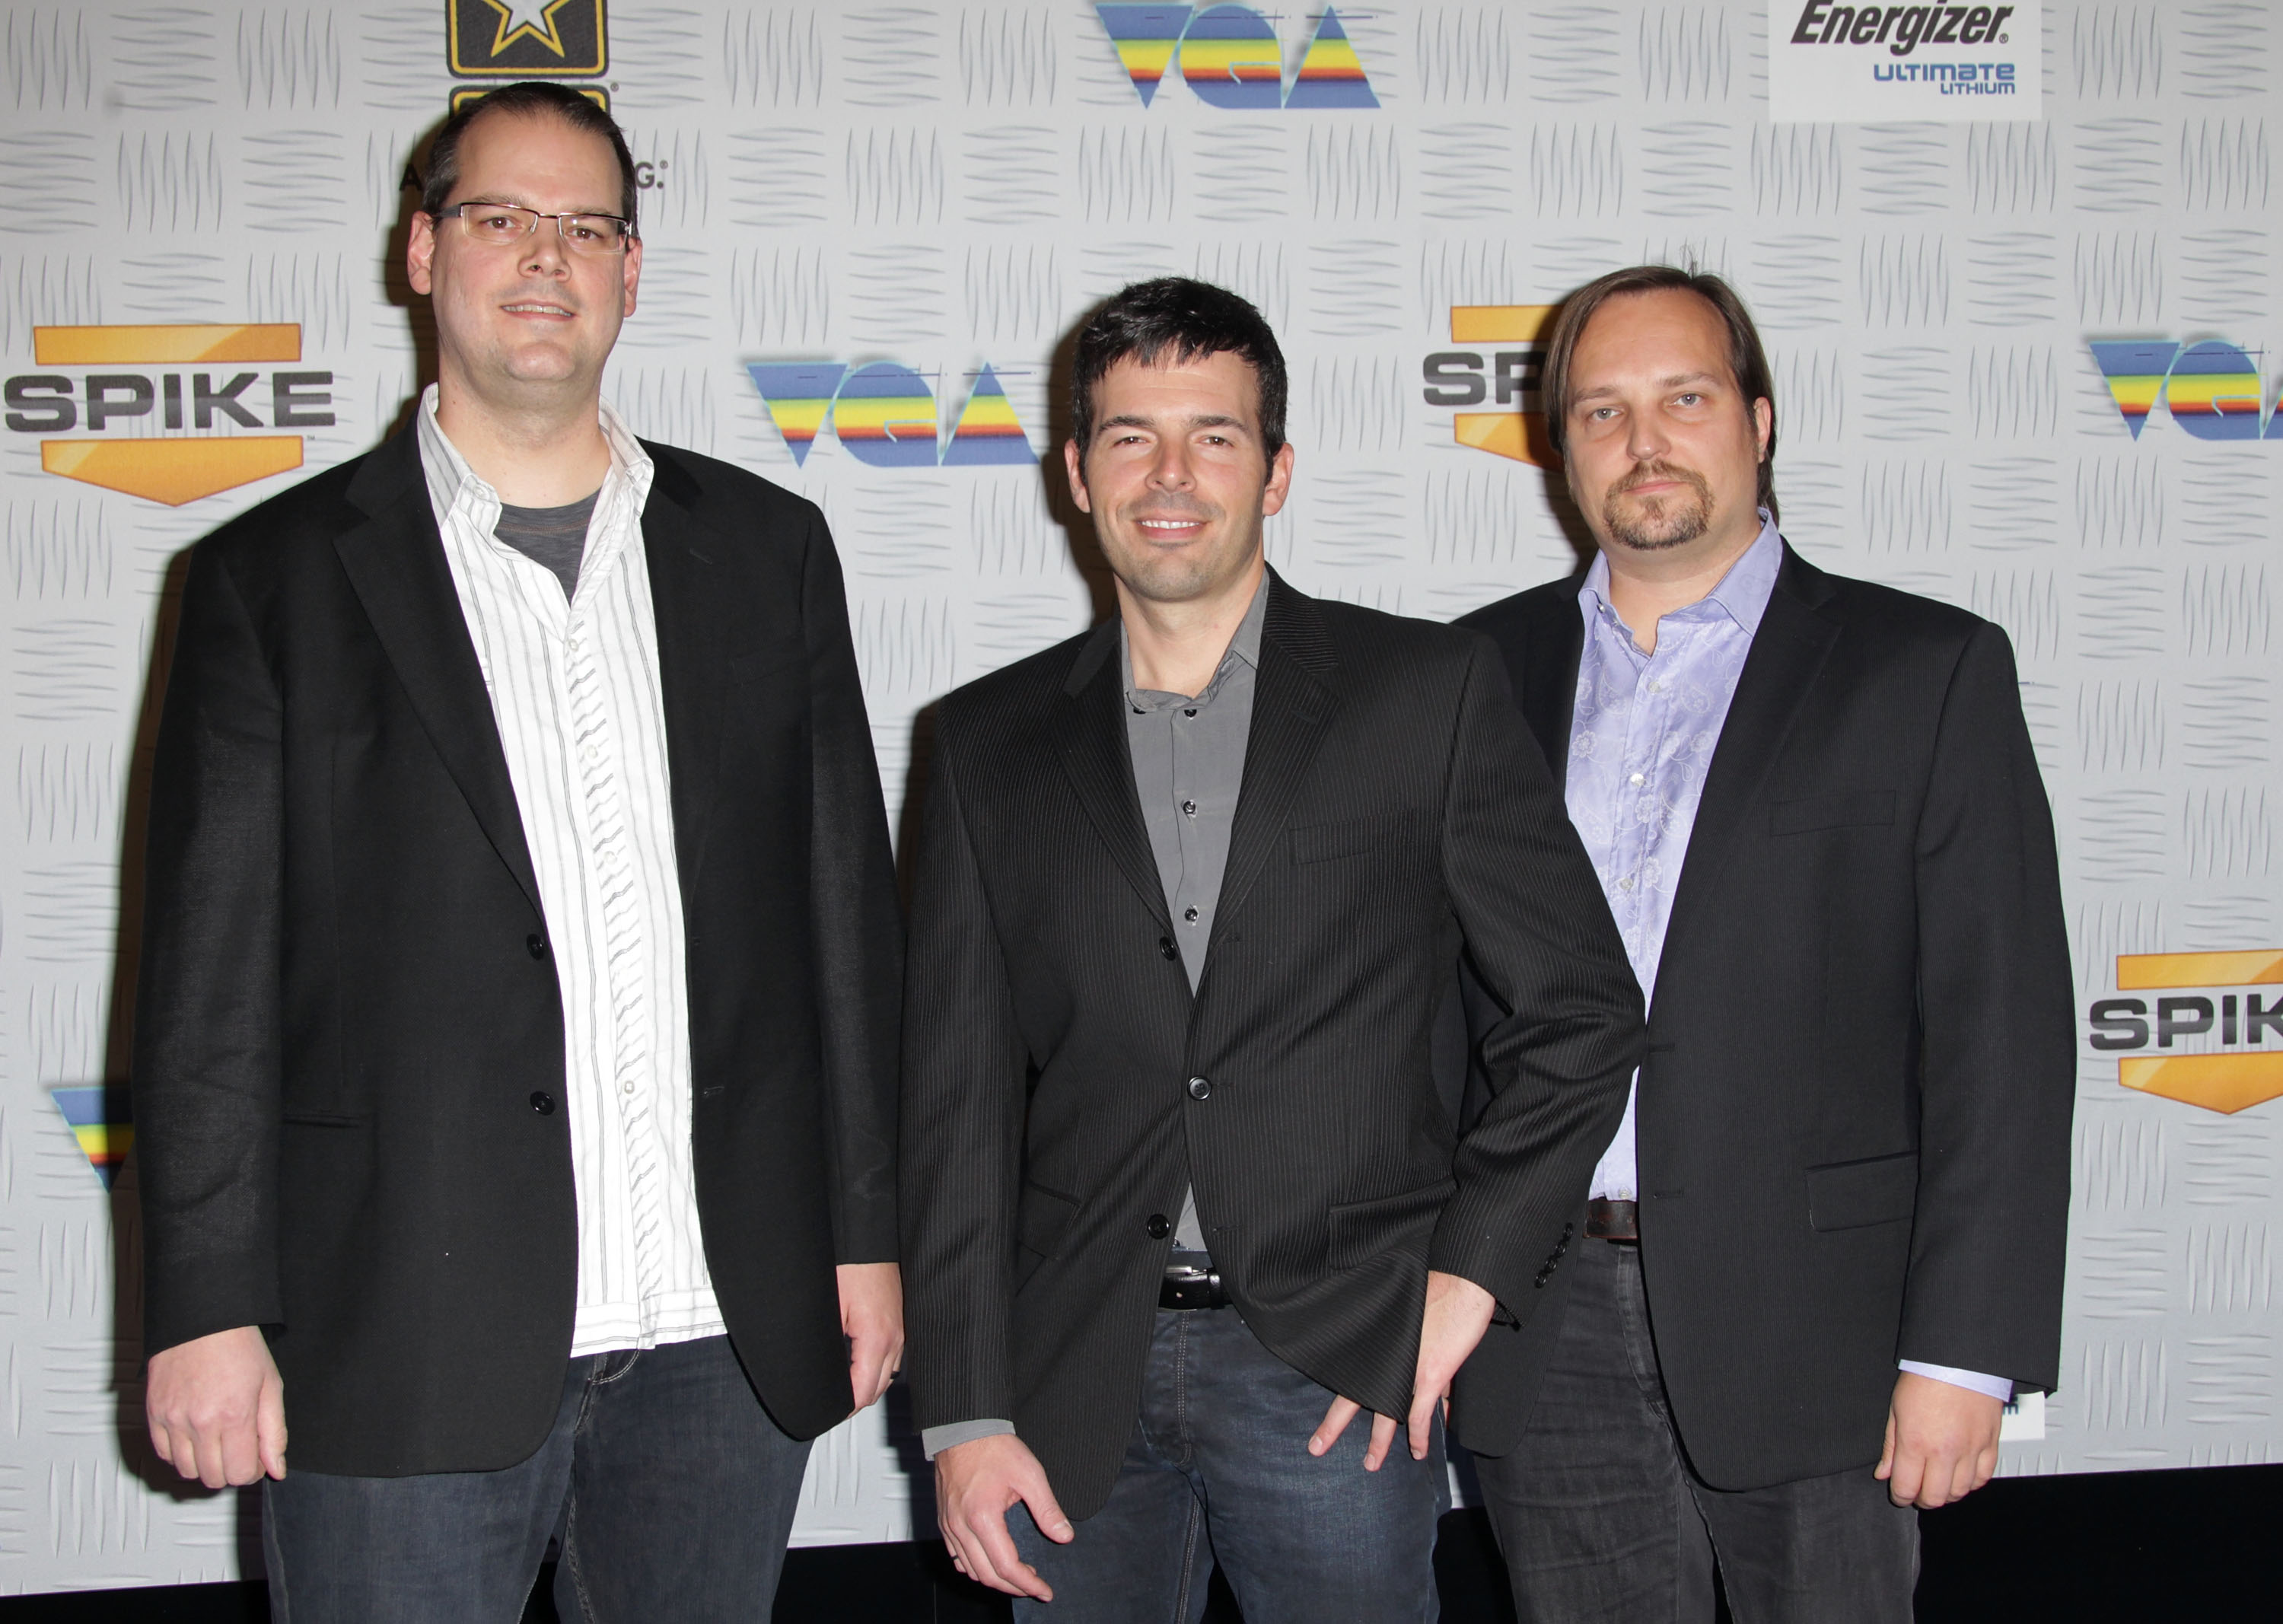 BioWare co-founder Ray Muzyka, Mass Effect 2 executive producer Casey Hudson, and  BioWare co-founder Greg Zeschuk at Spike TV's "2010 Video Game Awards" held at the LA Convention Center on December 11, 2010 in Los Angeles, California. (Frederick M. Brown—Getty Images)